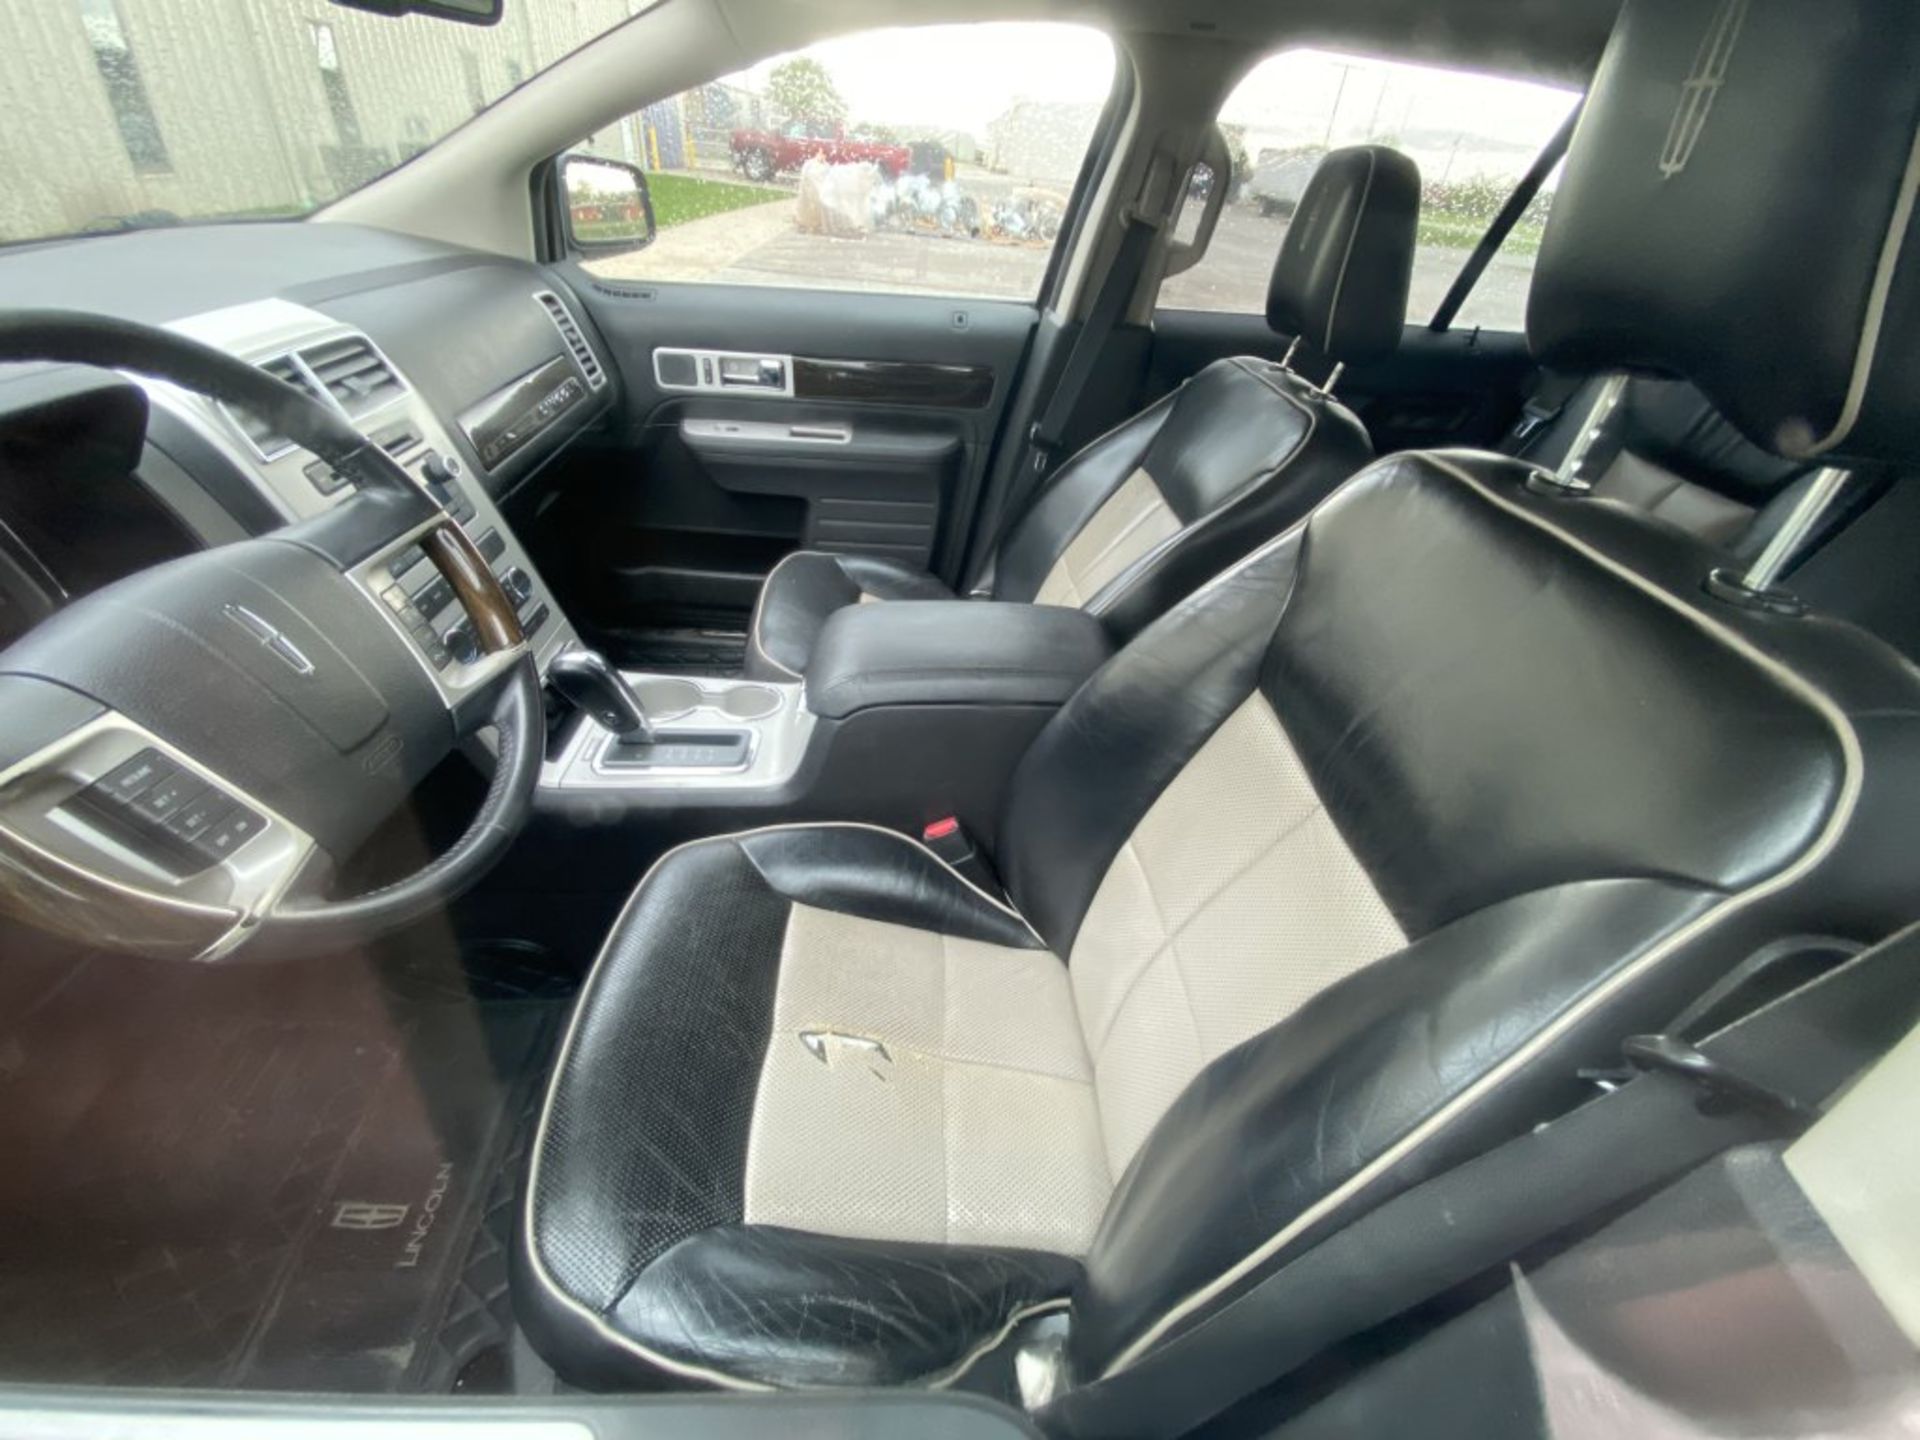 2008 LINCOLN MKX LIMITED EDITION, AUTO TRANS, AM/FM-CD-AUX, HEAT/AC SEATS, MOONROOF, PW, PL, - Image 18 of 21